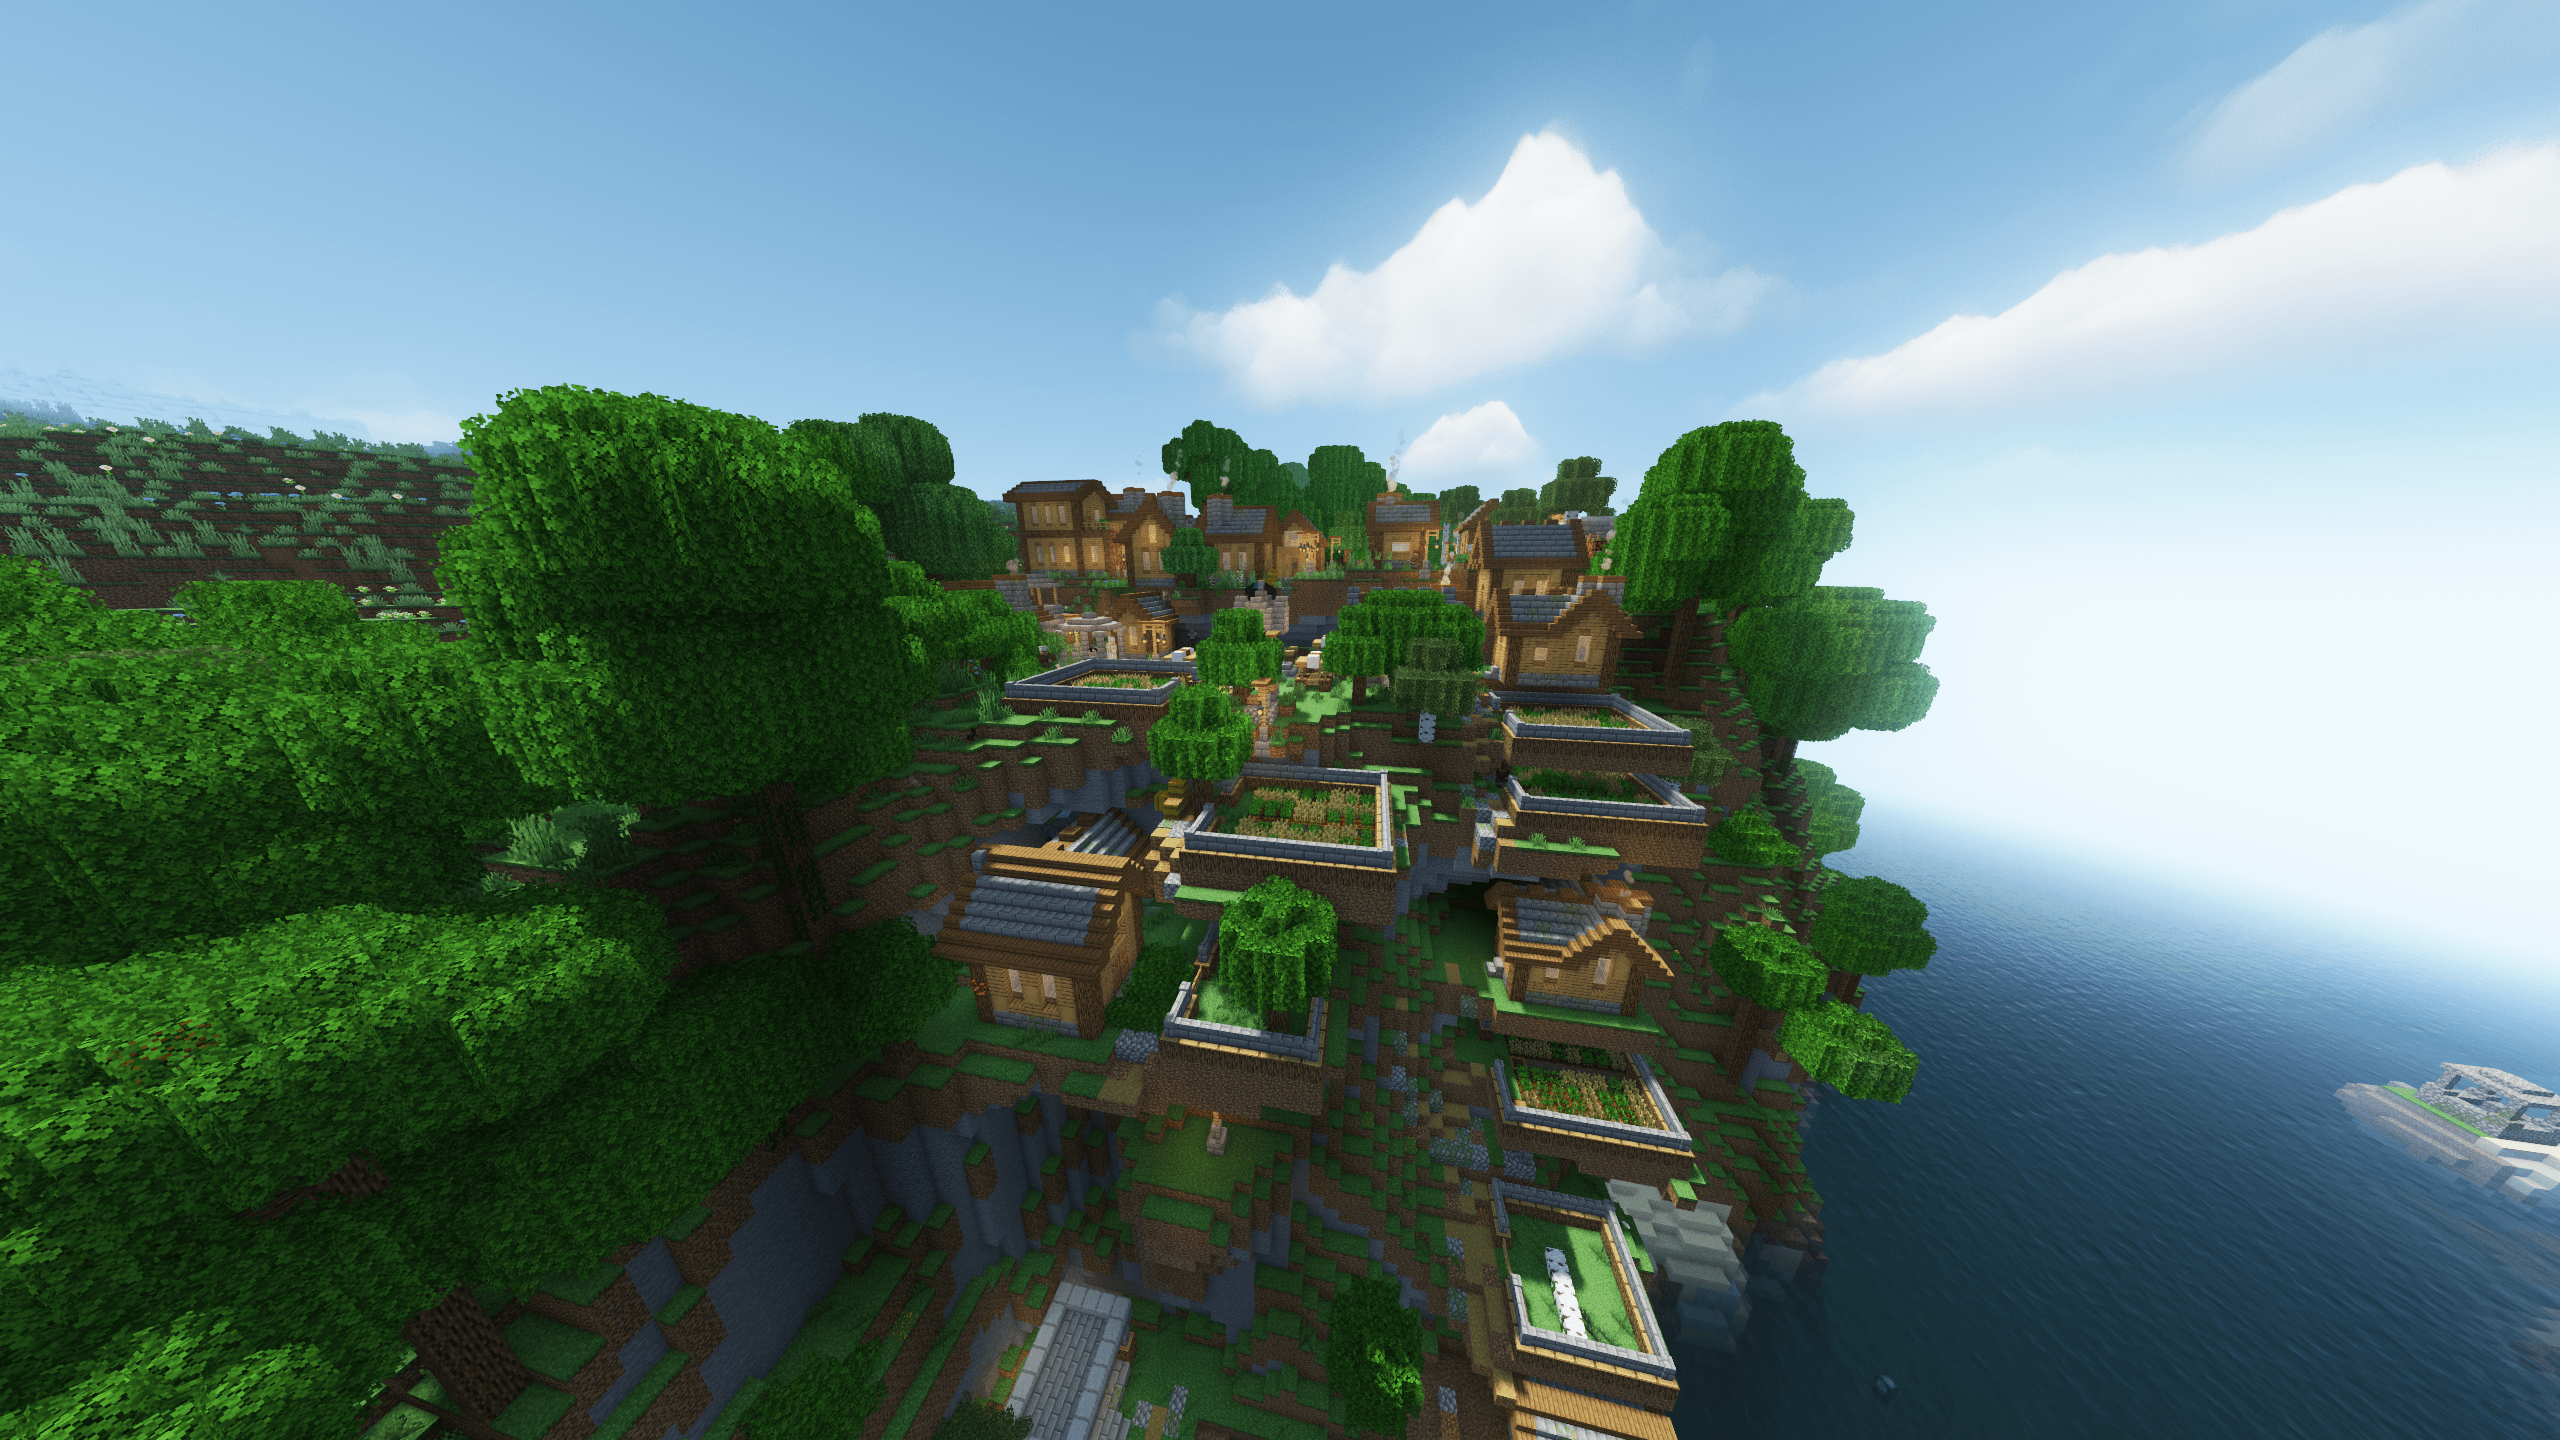 Awesome village